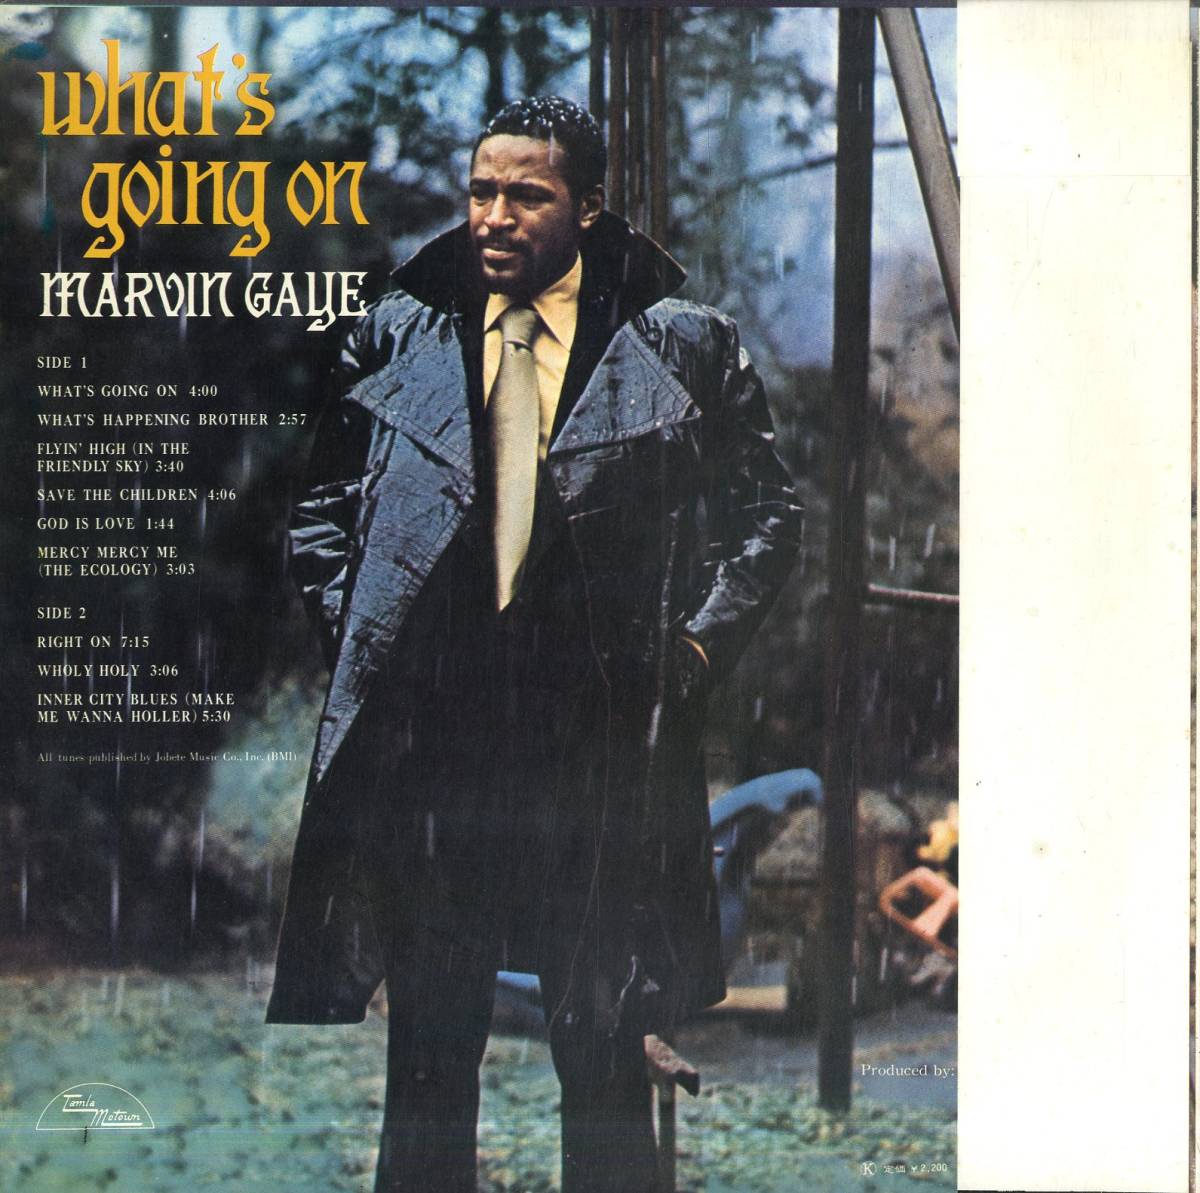 A00572408/LP/マーヴィン・ゲイ (MARVIN GAYE)「Whats Going On 愛の